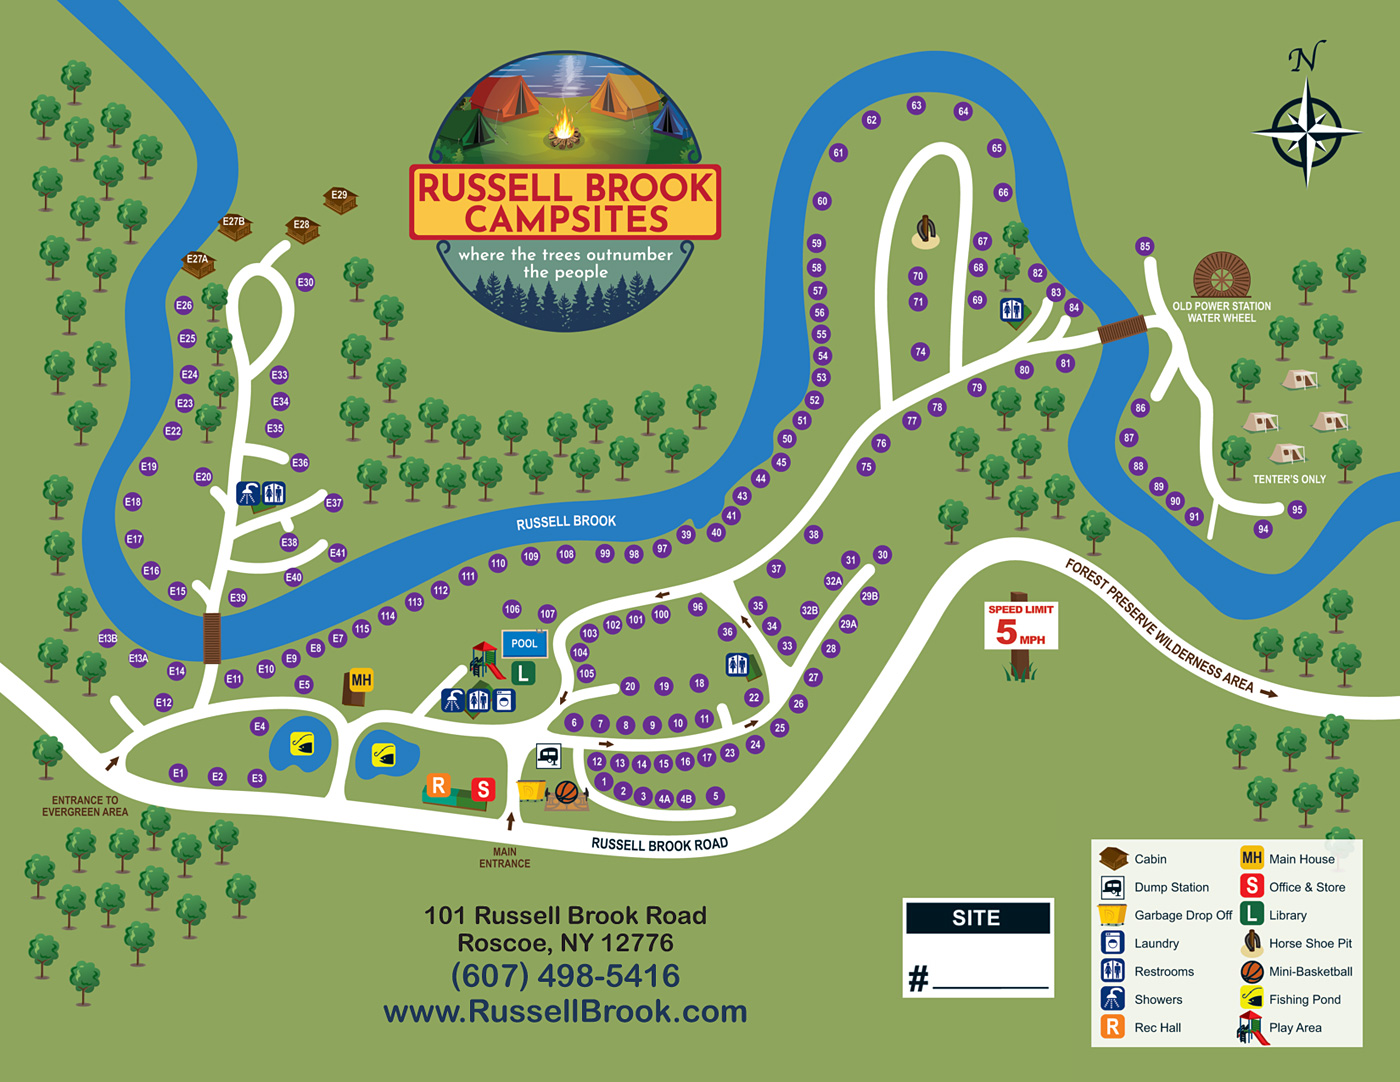 Russell Brook Campsites Site Map